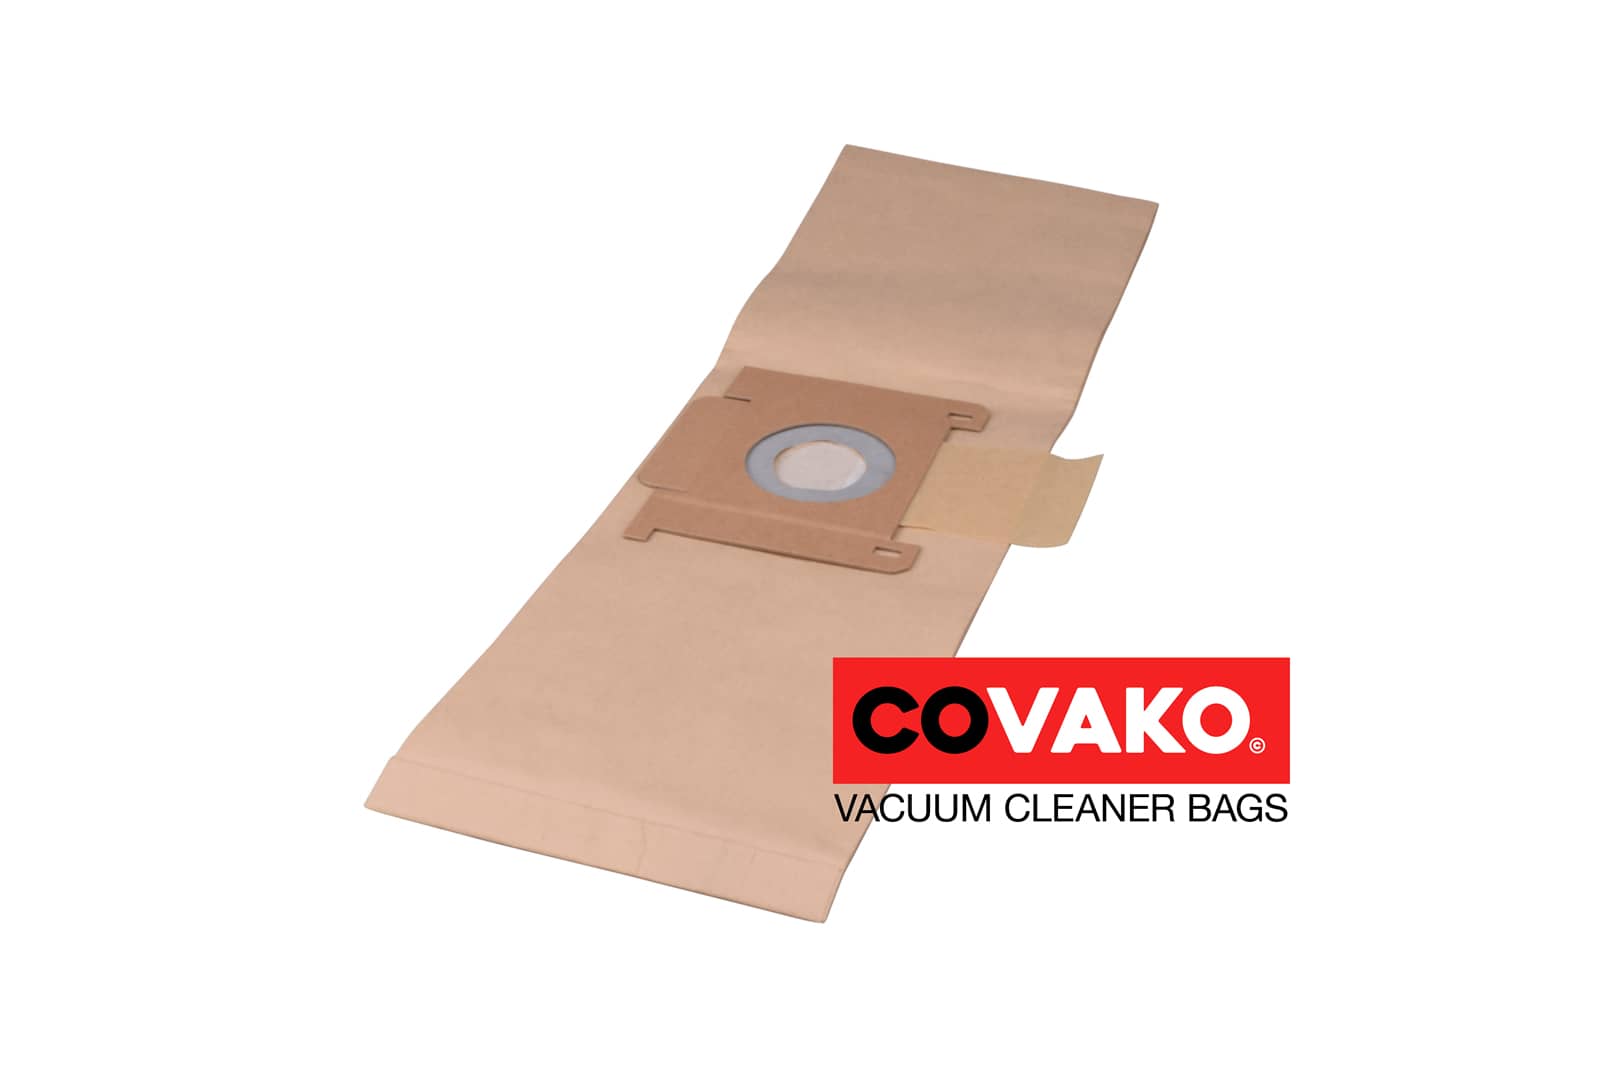 Fast Compacto 6 / Paper - Fast vacuum cleaner bags